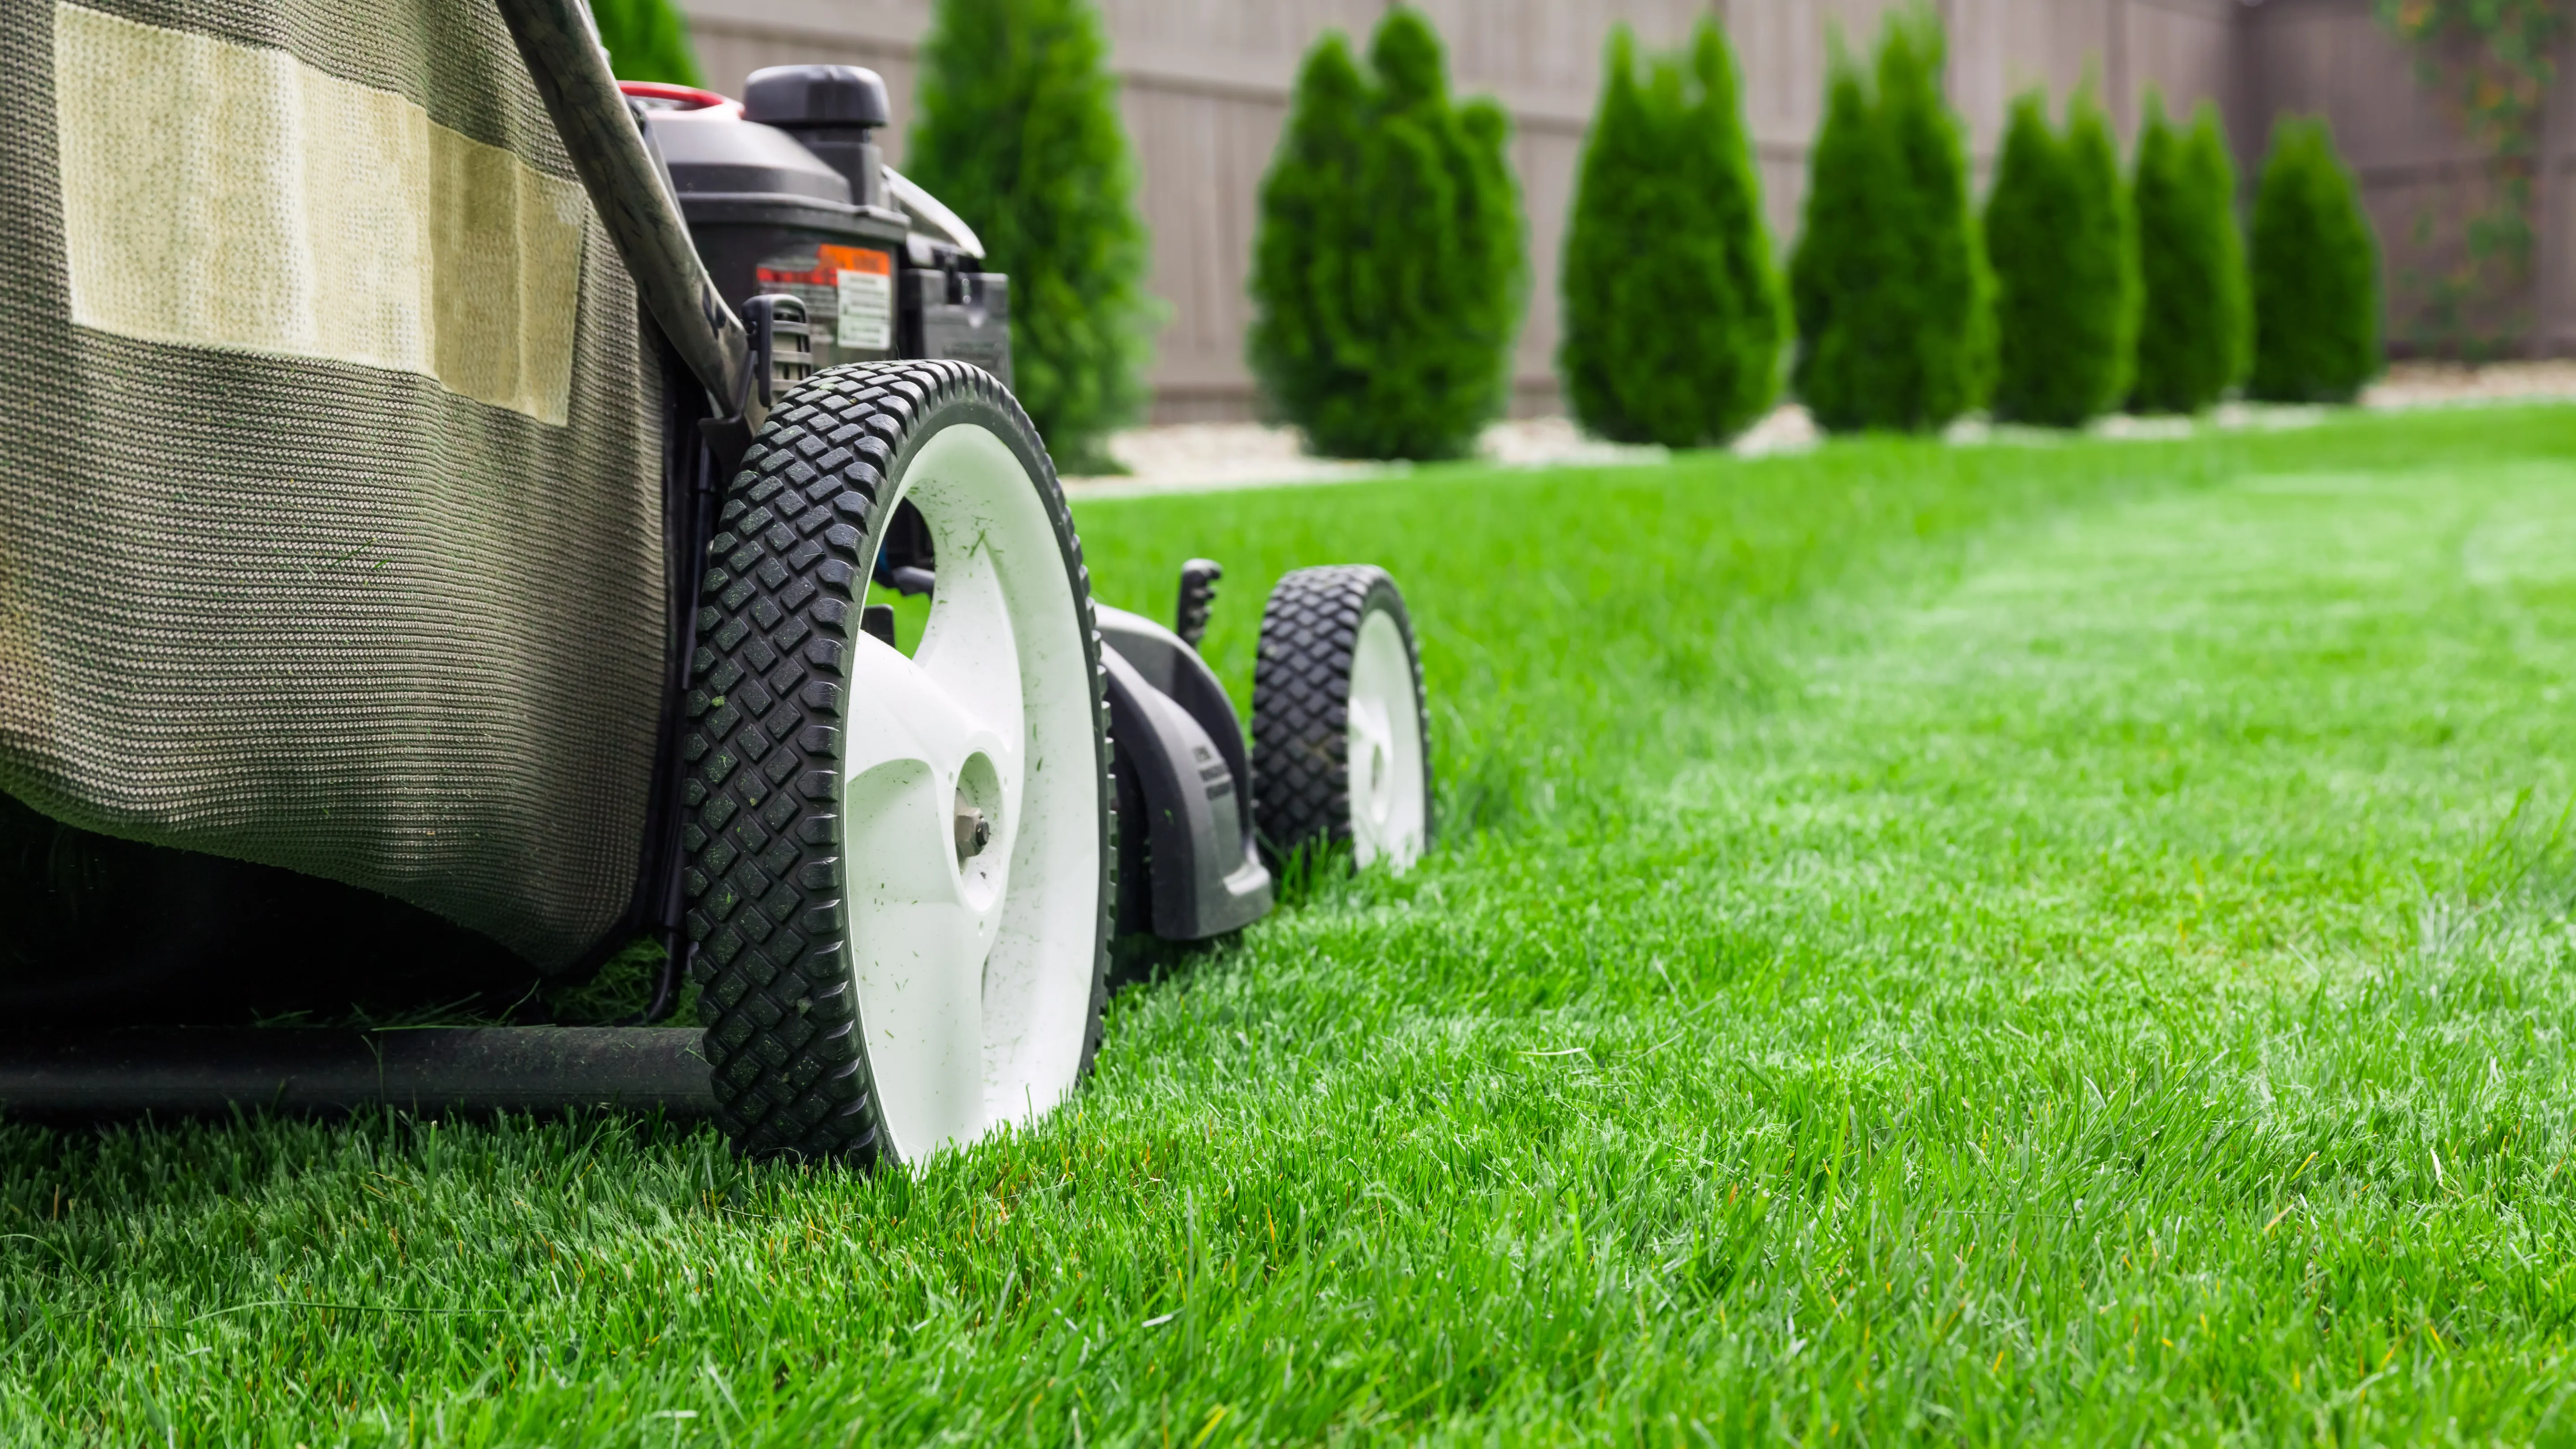 Professional performing lawn mowing service in Austin, Texas